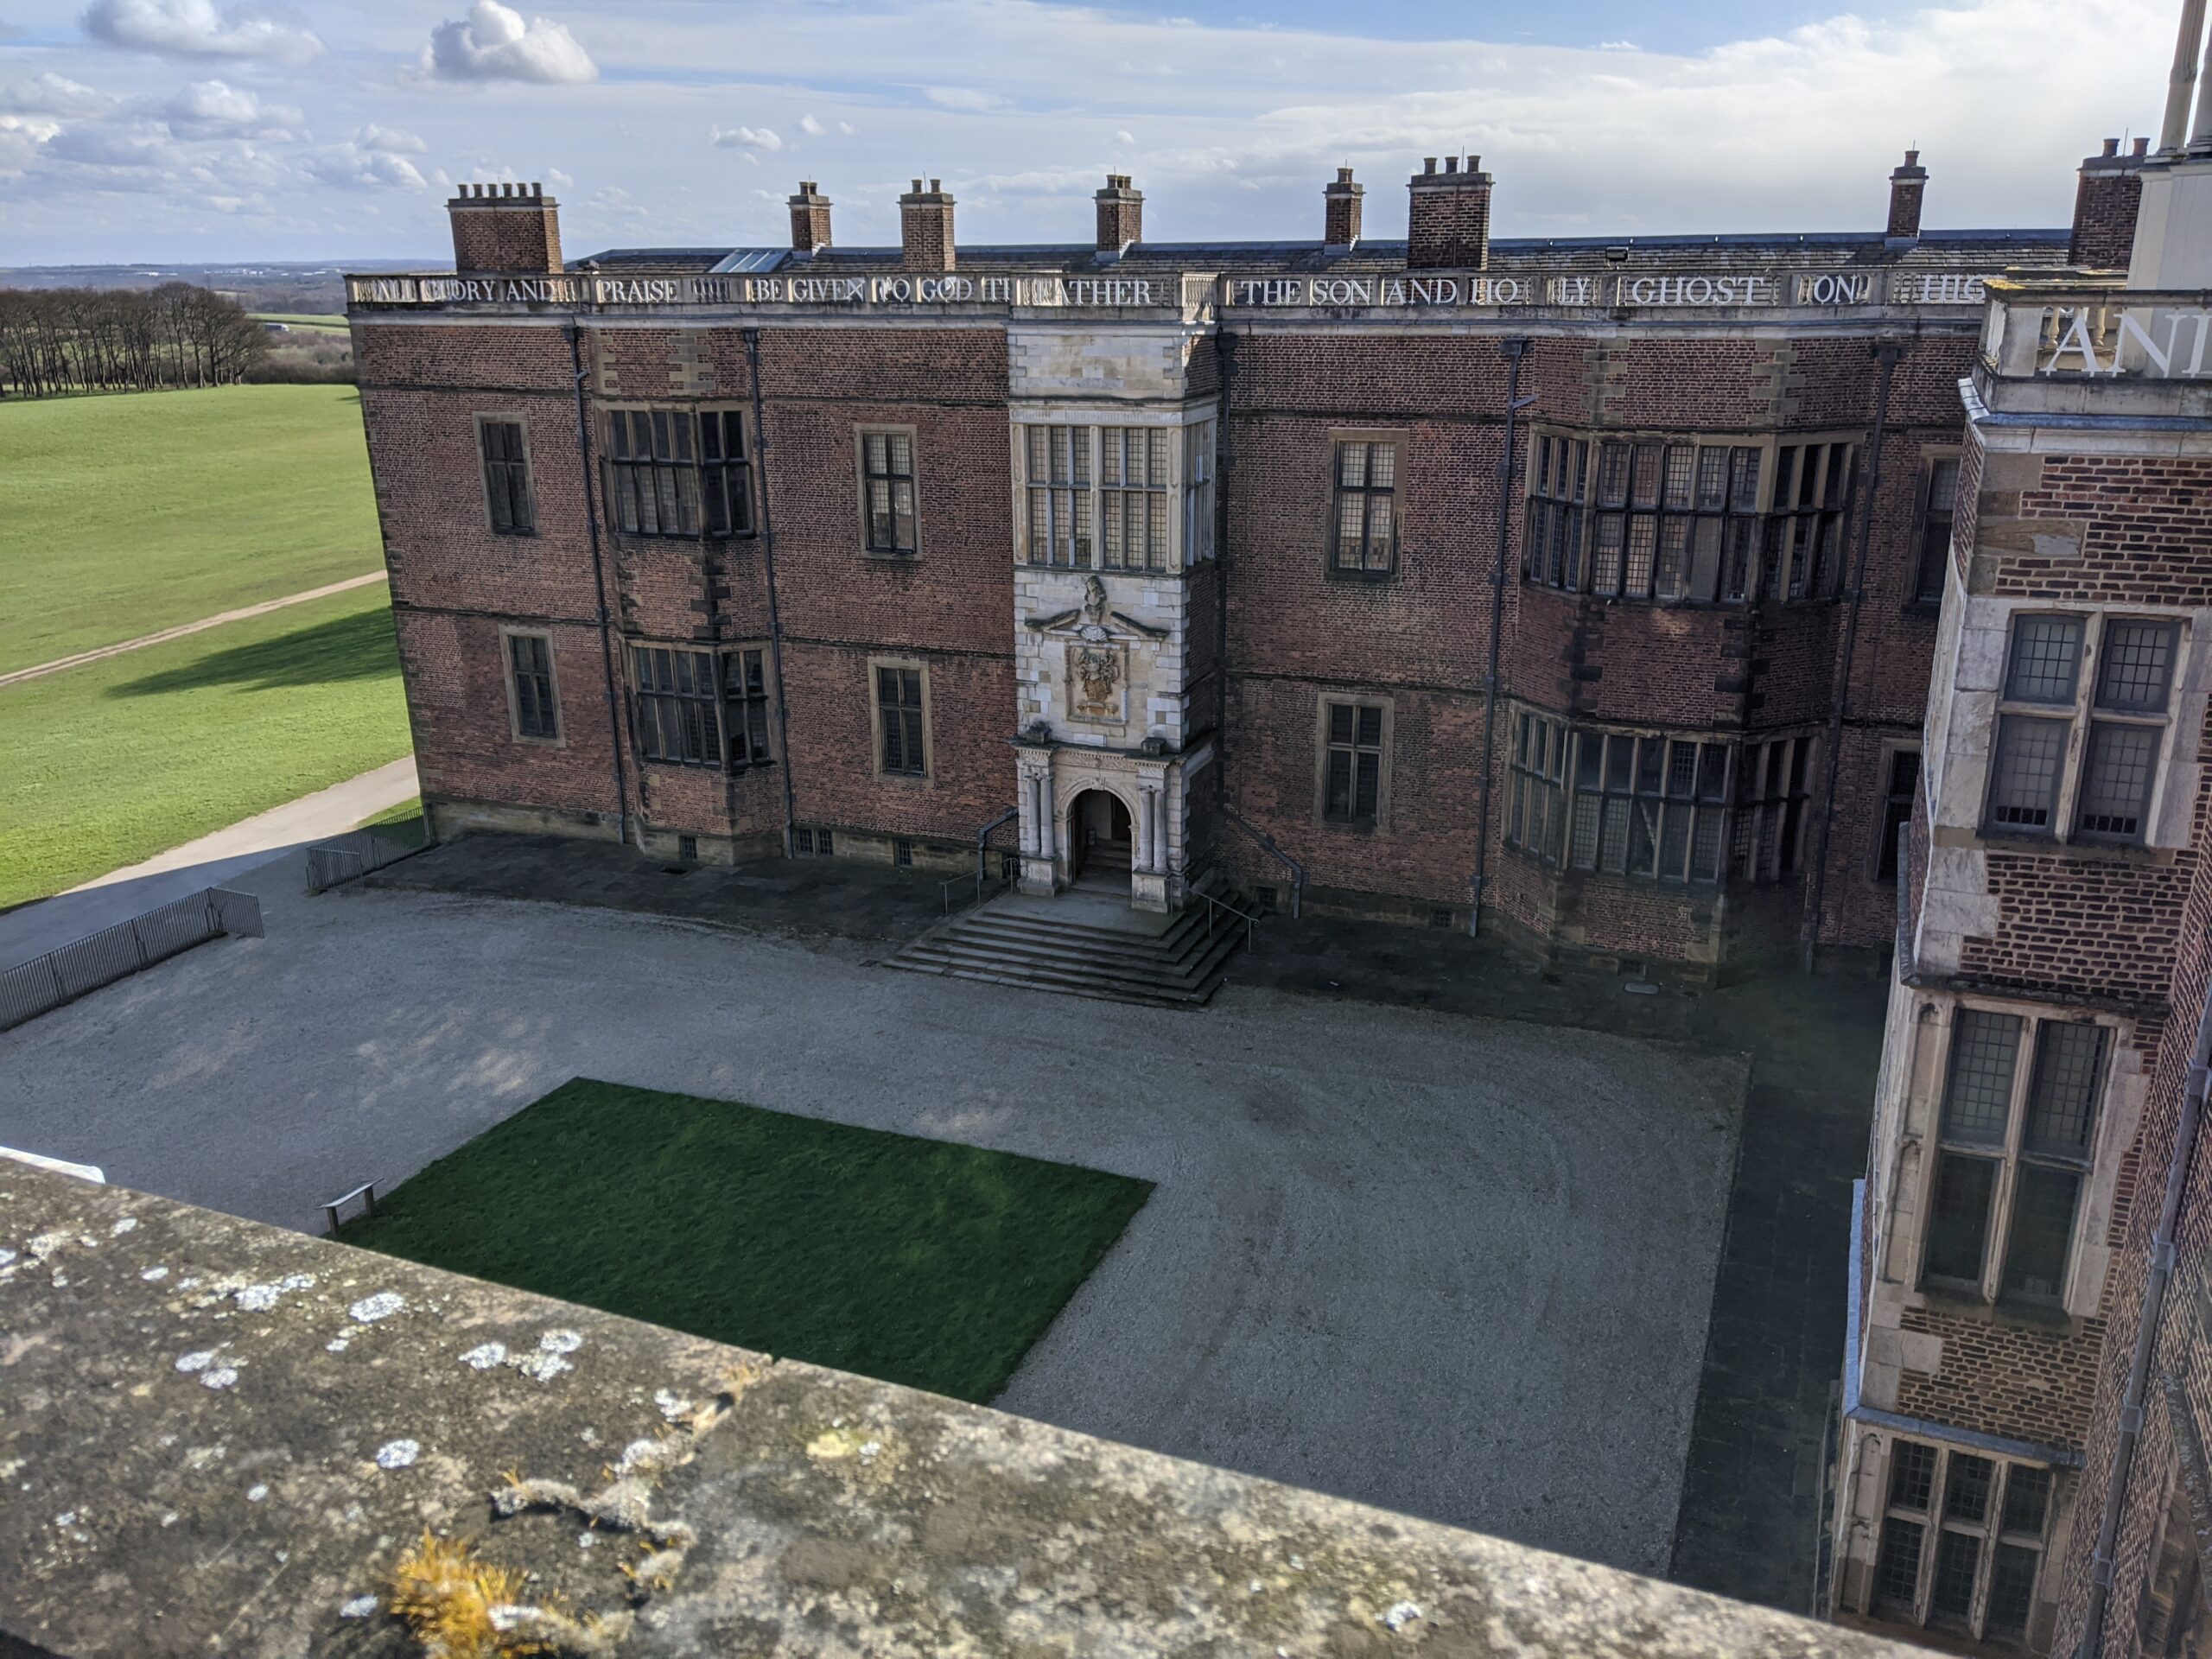 Rooftop Experience at Temple Newsam